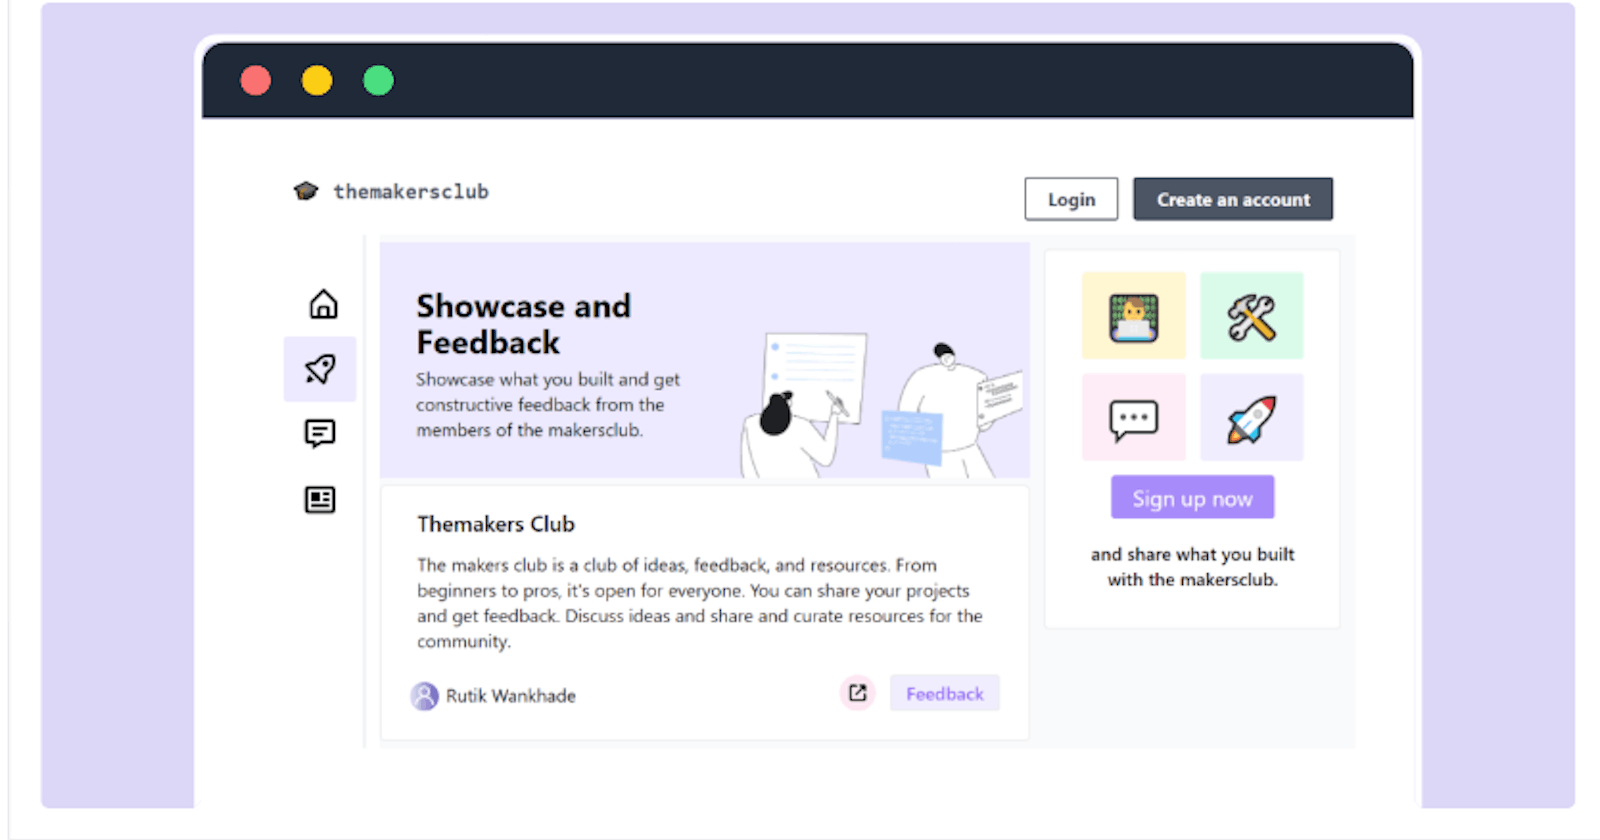 TheMakersClub: a club of ideas, feedbacks and resources